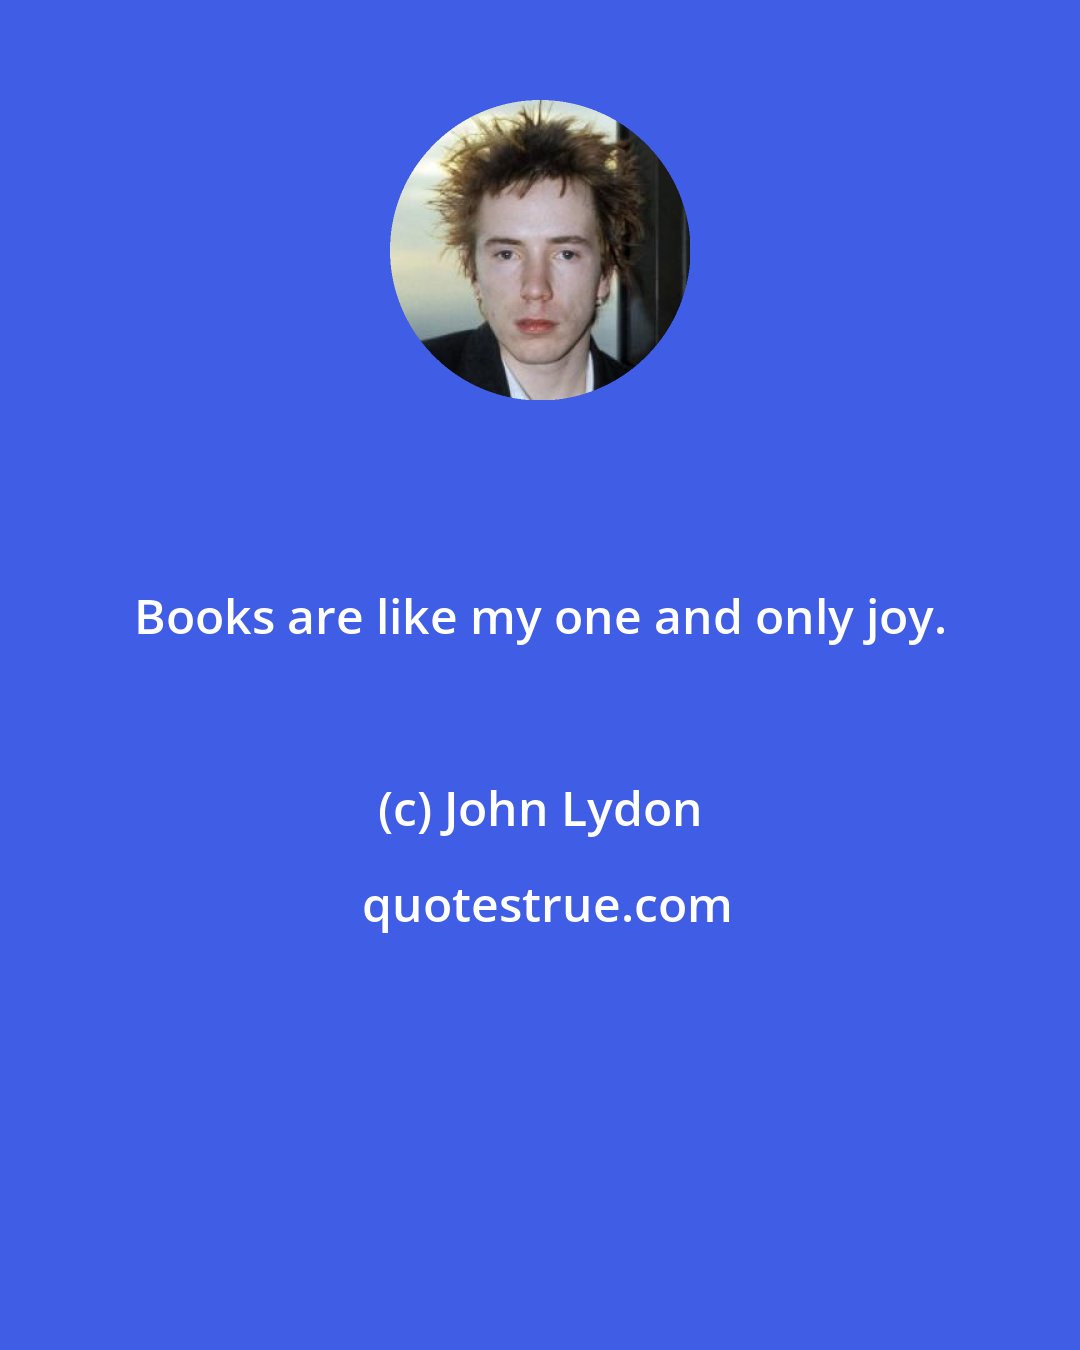 John Lydon: Books are like my one and only joy.